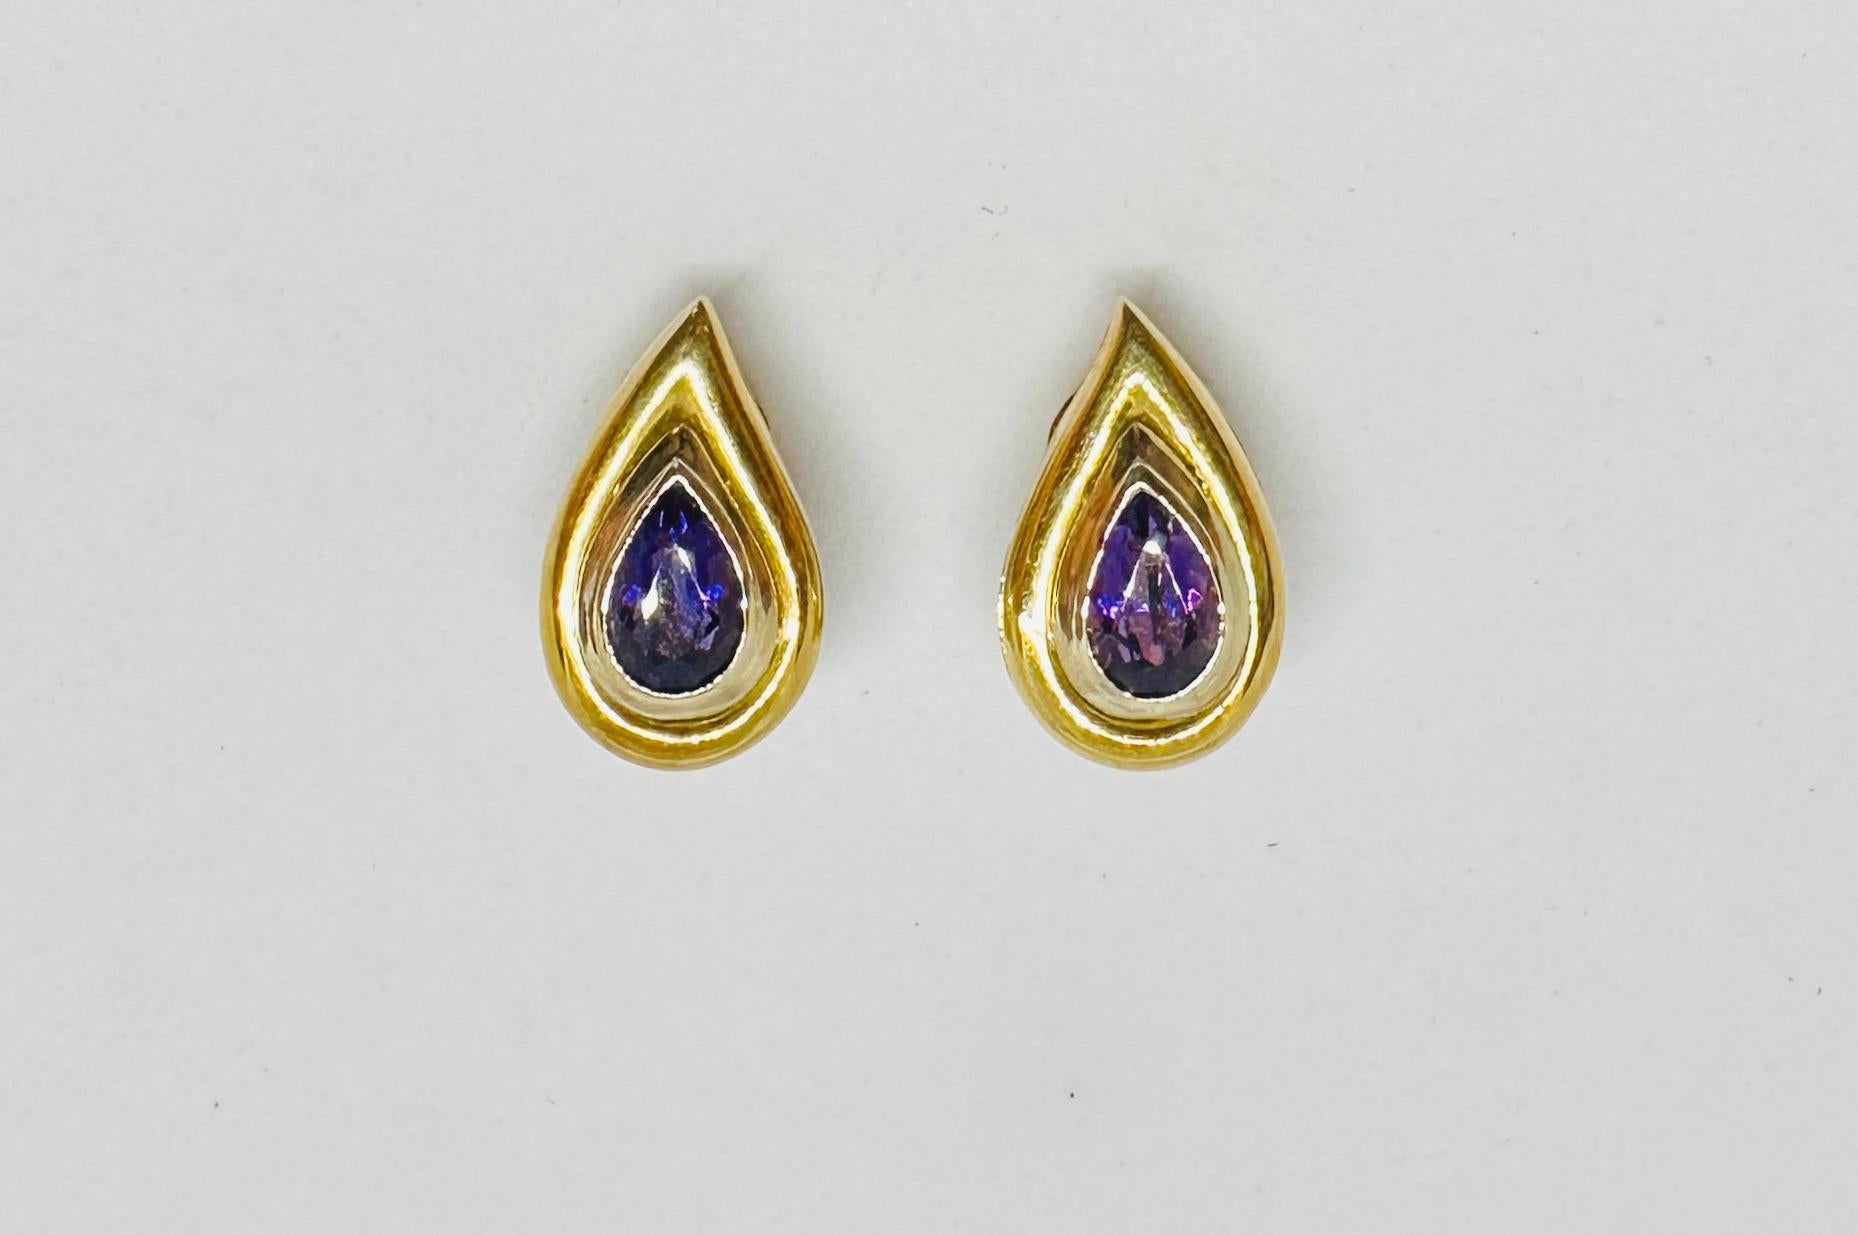 Beautiful and extremely rare teardrop-shaped ear clips in 18K yellow and white gold with faceted amethysts by Christofle Paris.

In addition to 